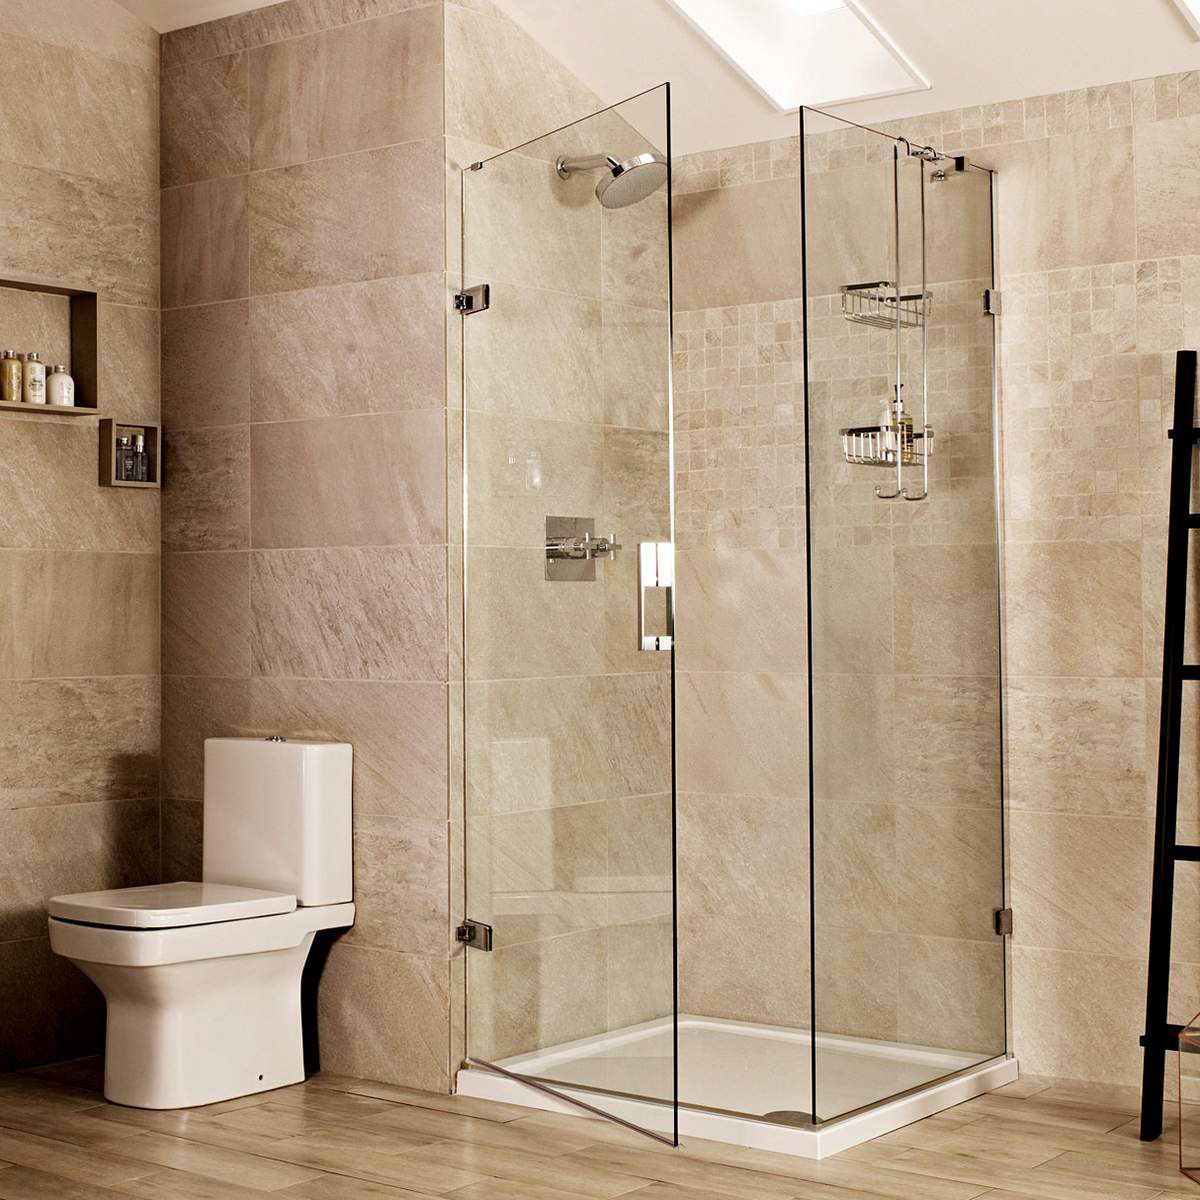 picture of a hinged shower door